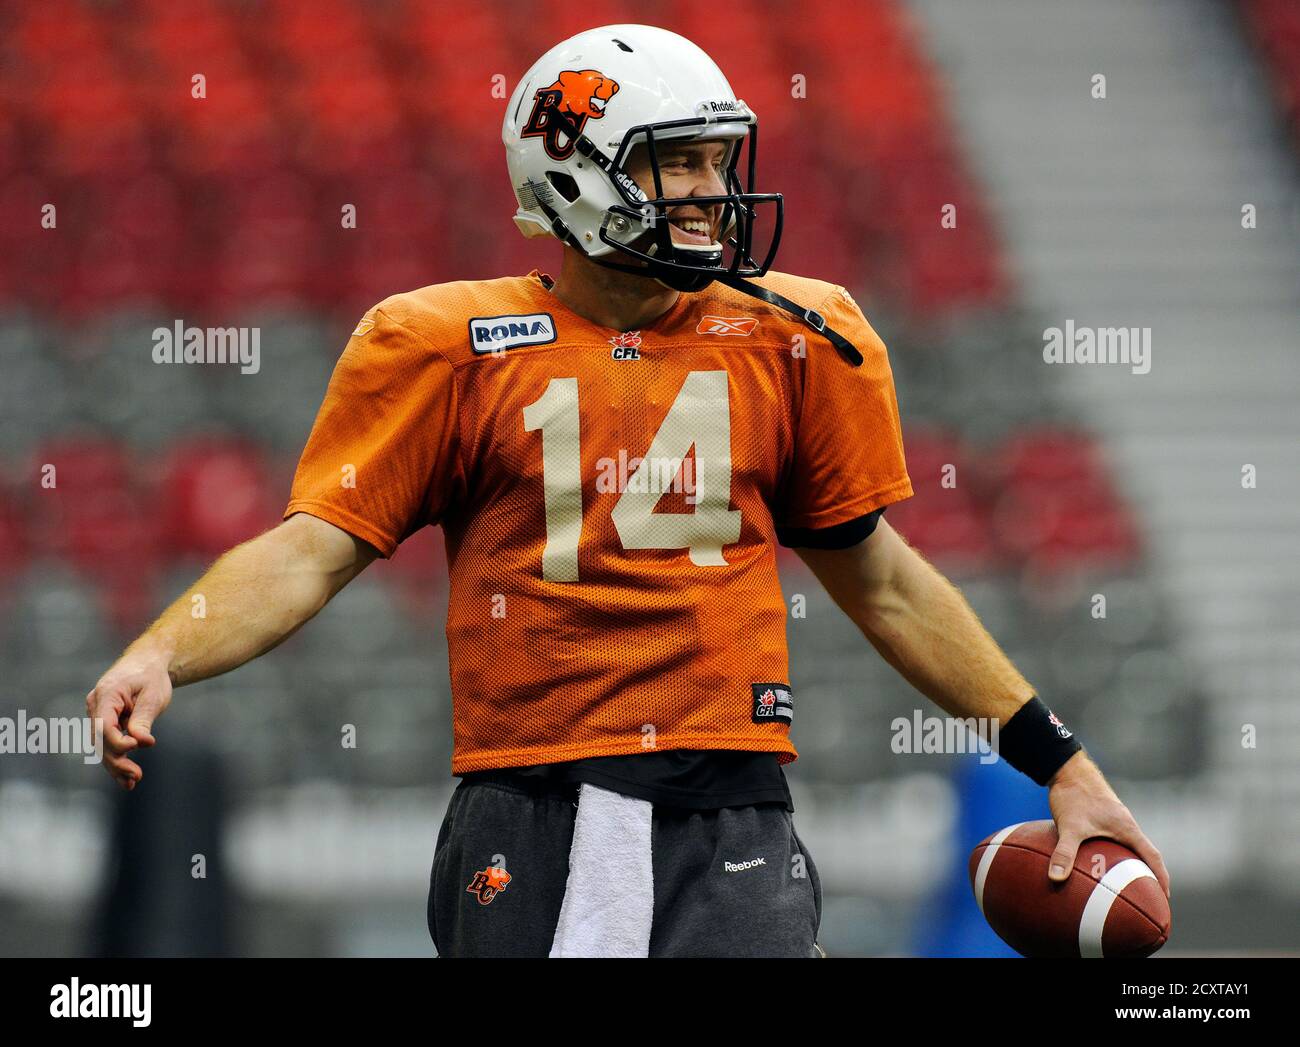 BC Lions' quarterback Travis Lulay smiles during their practice at the start of Grey Cup week in Vancouver, British Columbia, November 23, 2011. The Winnipeg Blue Bombers will play the BC Lions at BC Place in the CFL's 99th Grey Cup football game on Sunday. REUTERS/Todd Korol (CANADA - Tags: SPORT FOOTBALL) Stock Photo